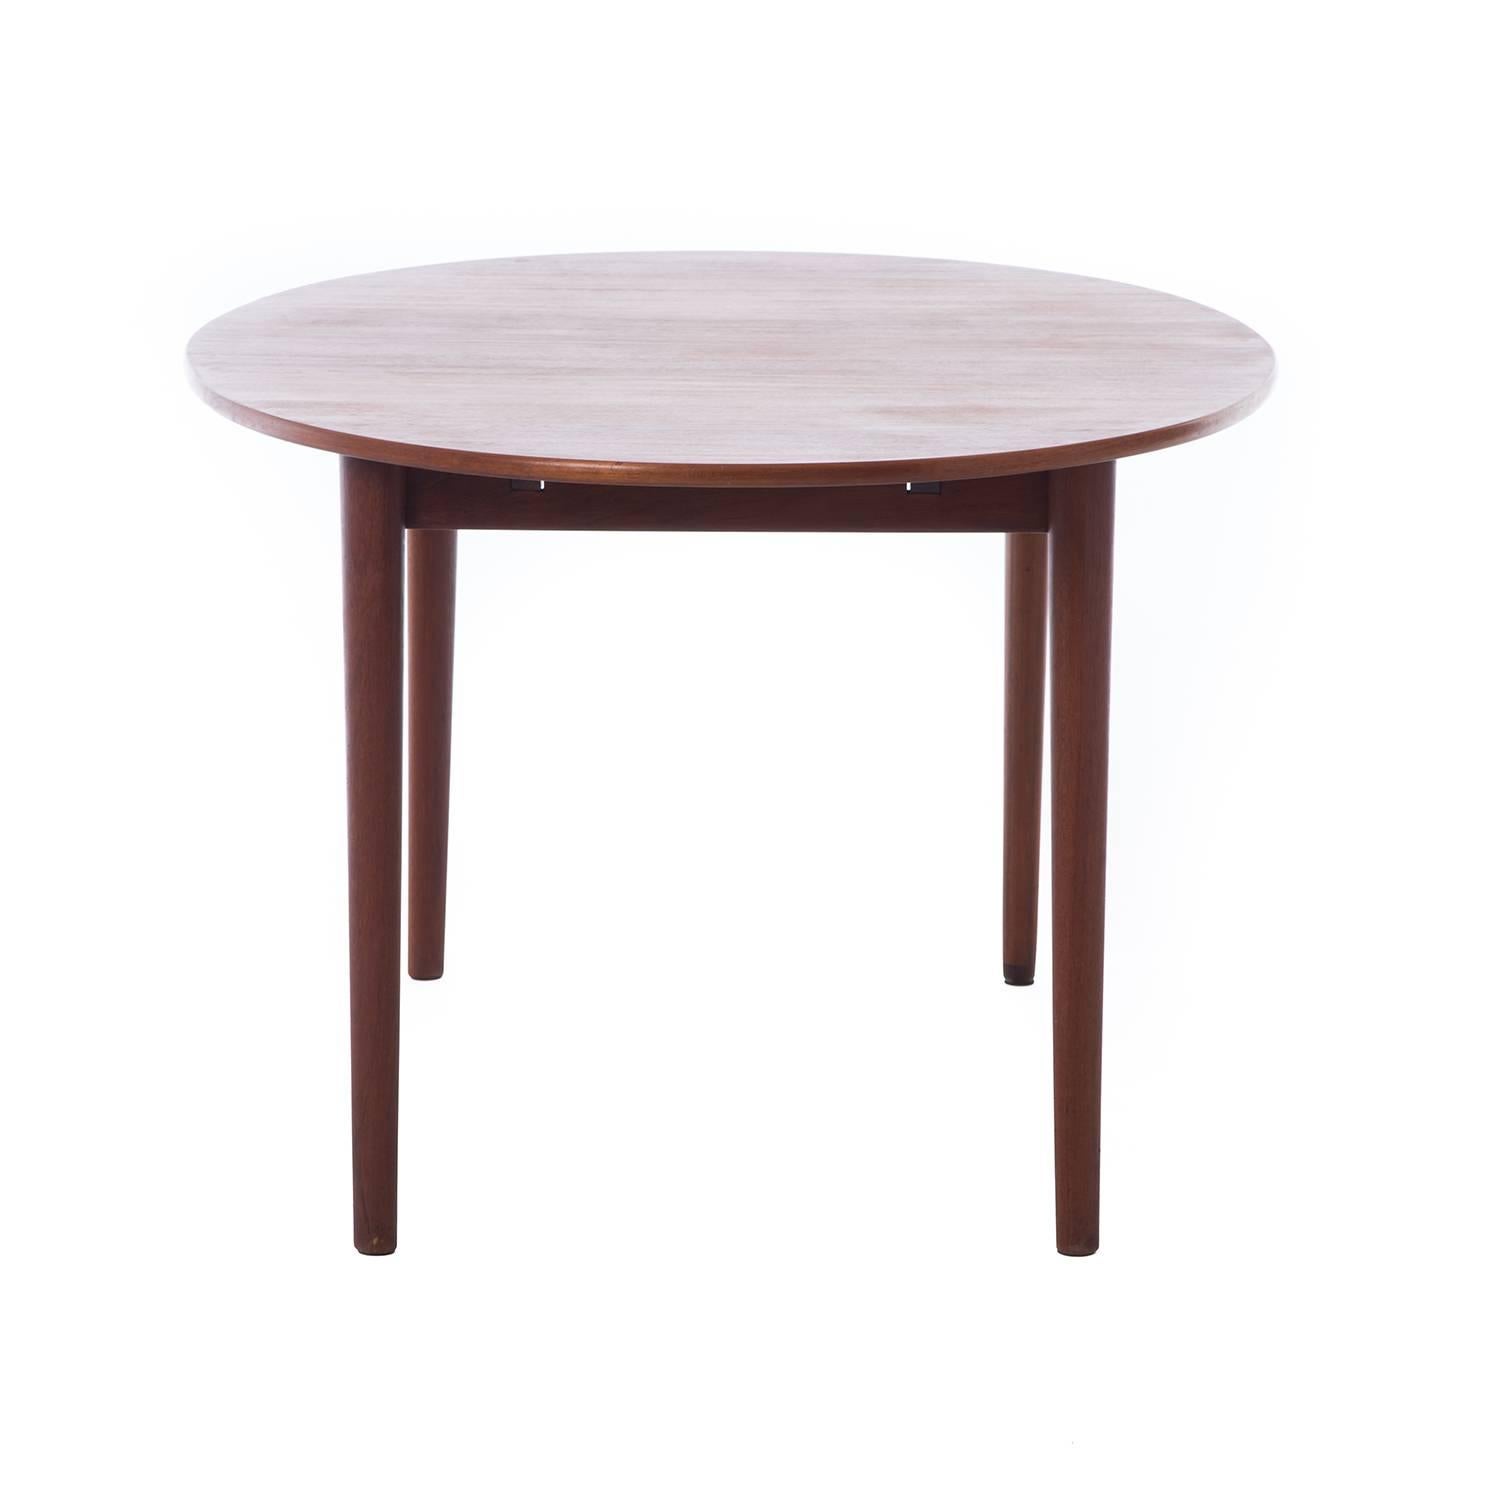 This graceful table is a subtle ellipse shape that could pass for oval if one looked at it too quickly. It seats 6 in it's smallest expression with the addition of the leaves it expands to seat 8-10 people. Perfect for a petite and elegant dining